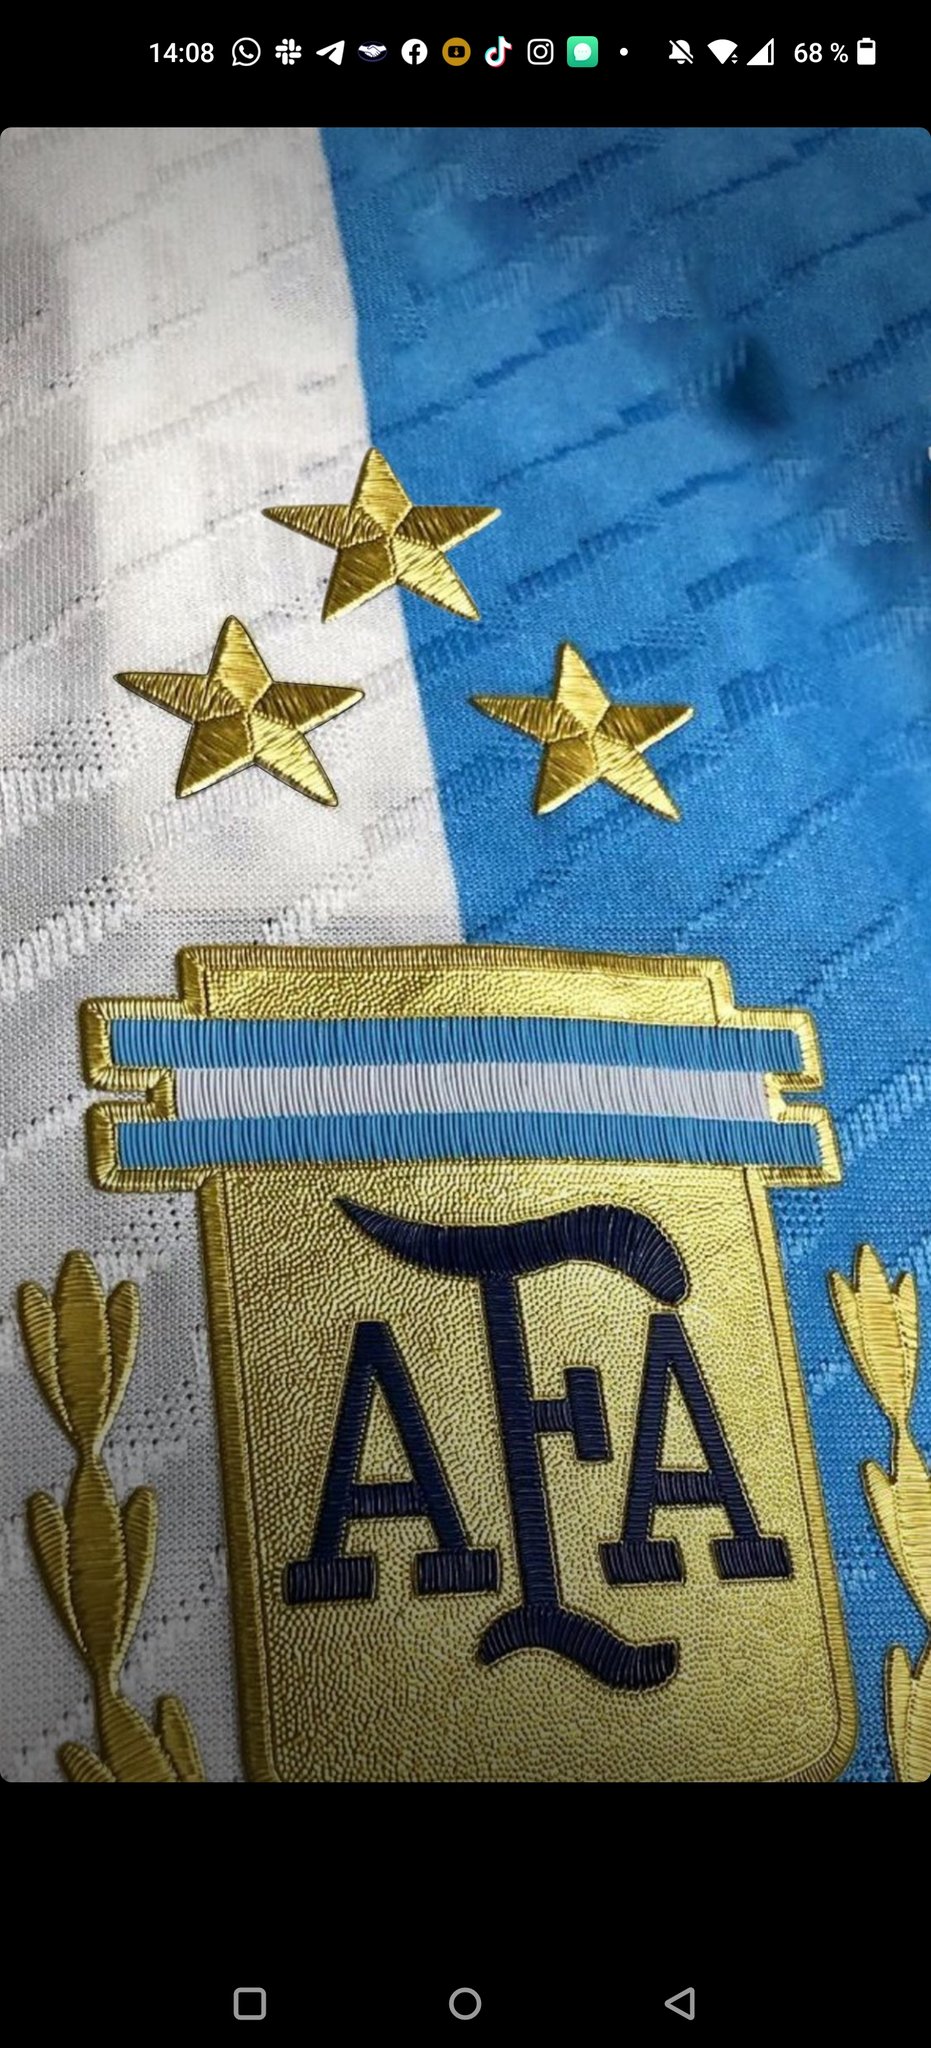 Watch the third World Cup star get added to Argentina's shirt | SoccerGator